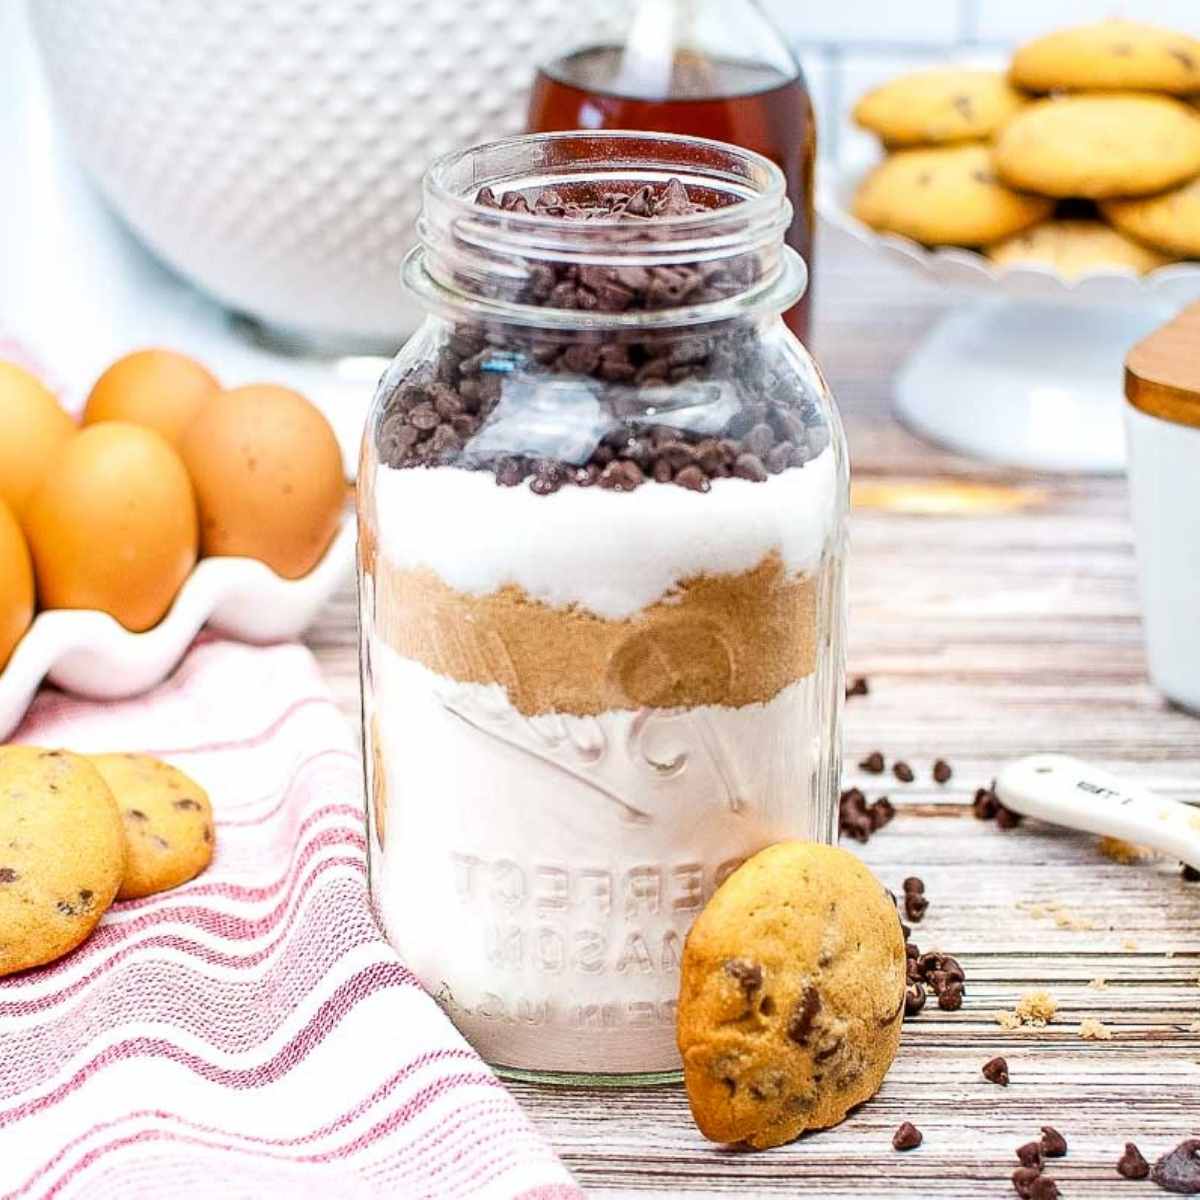 a mason jar filled with chocolate chip cookie mix next to baked cookies